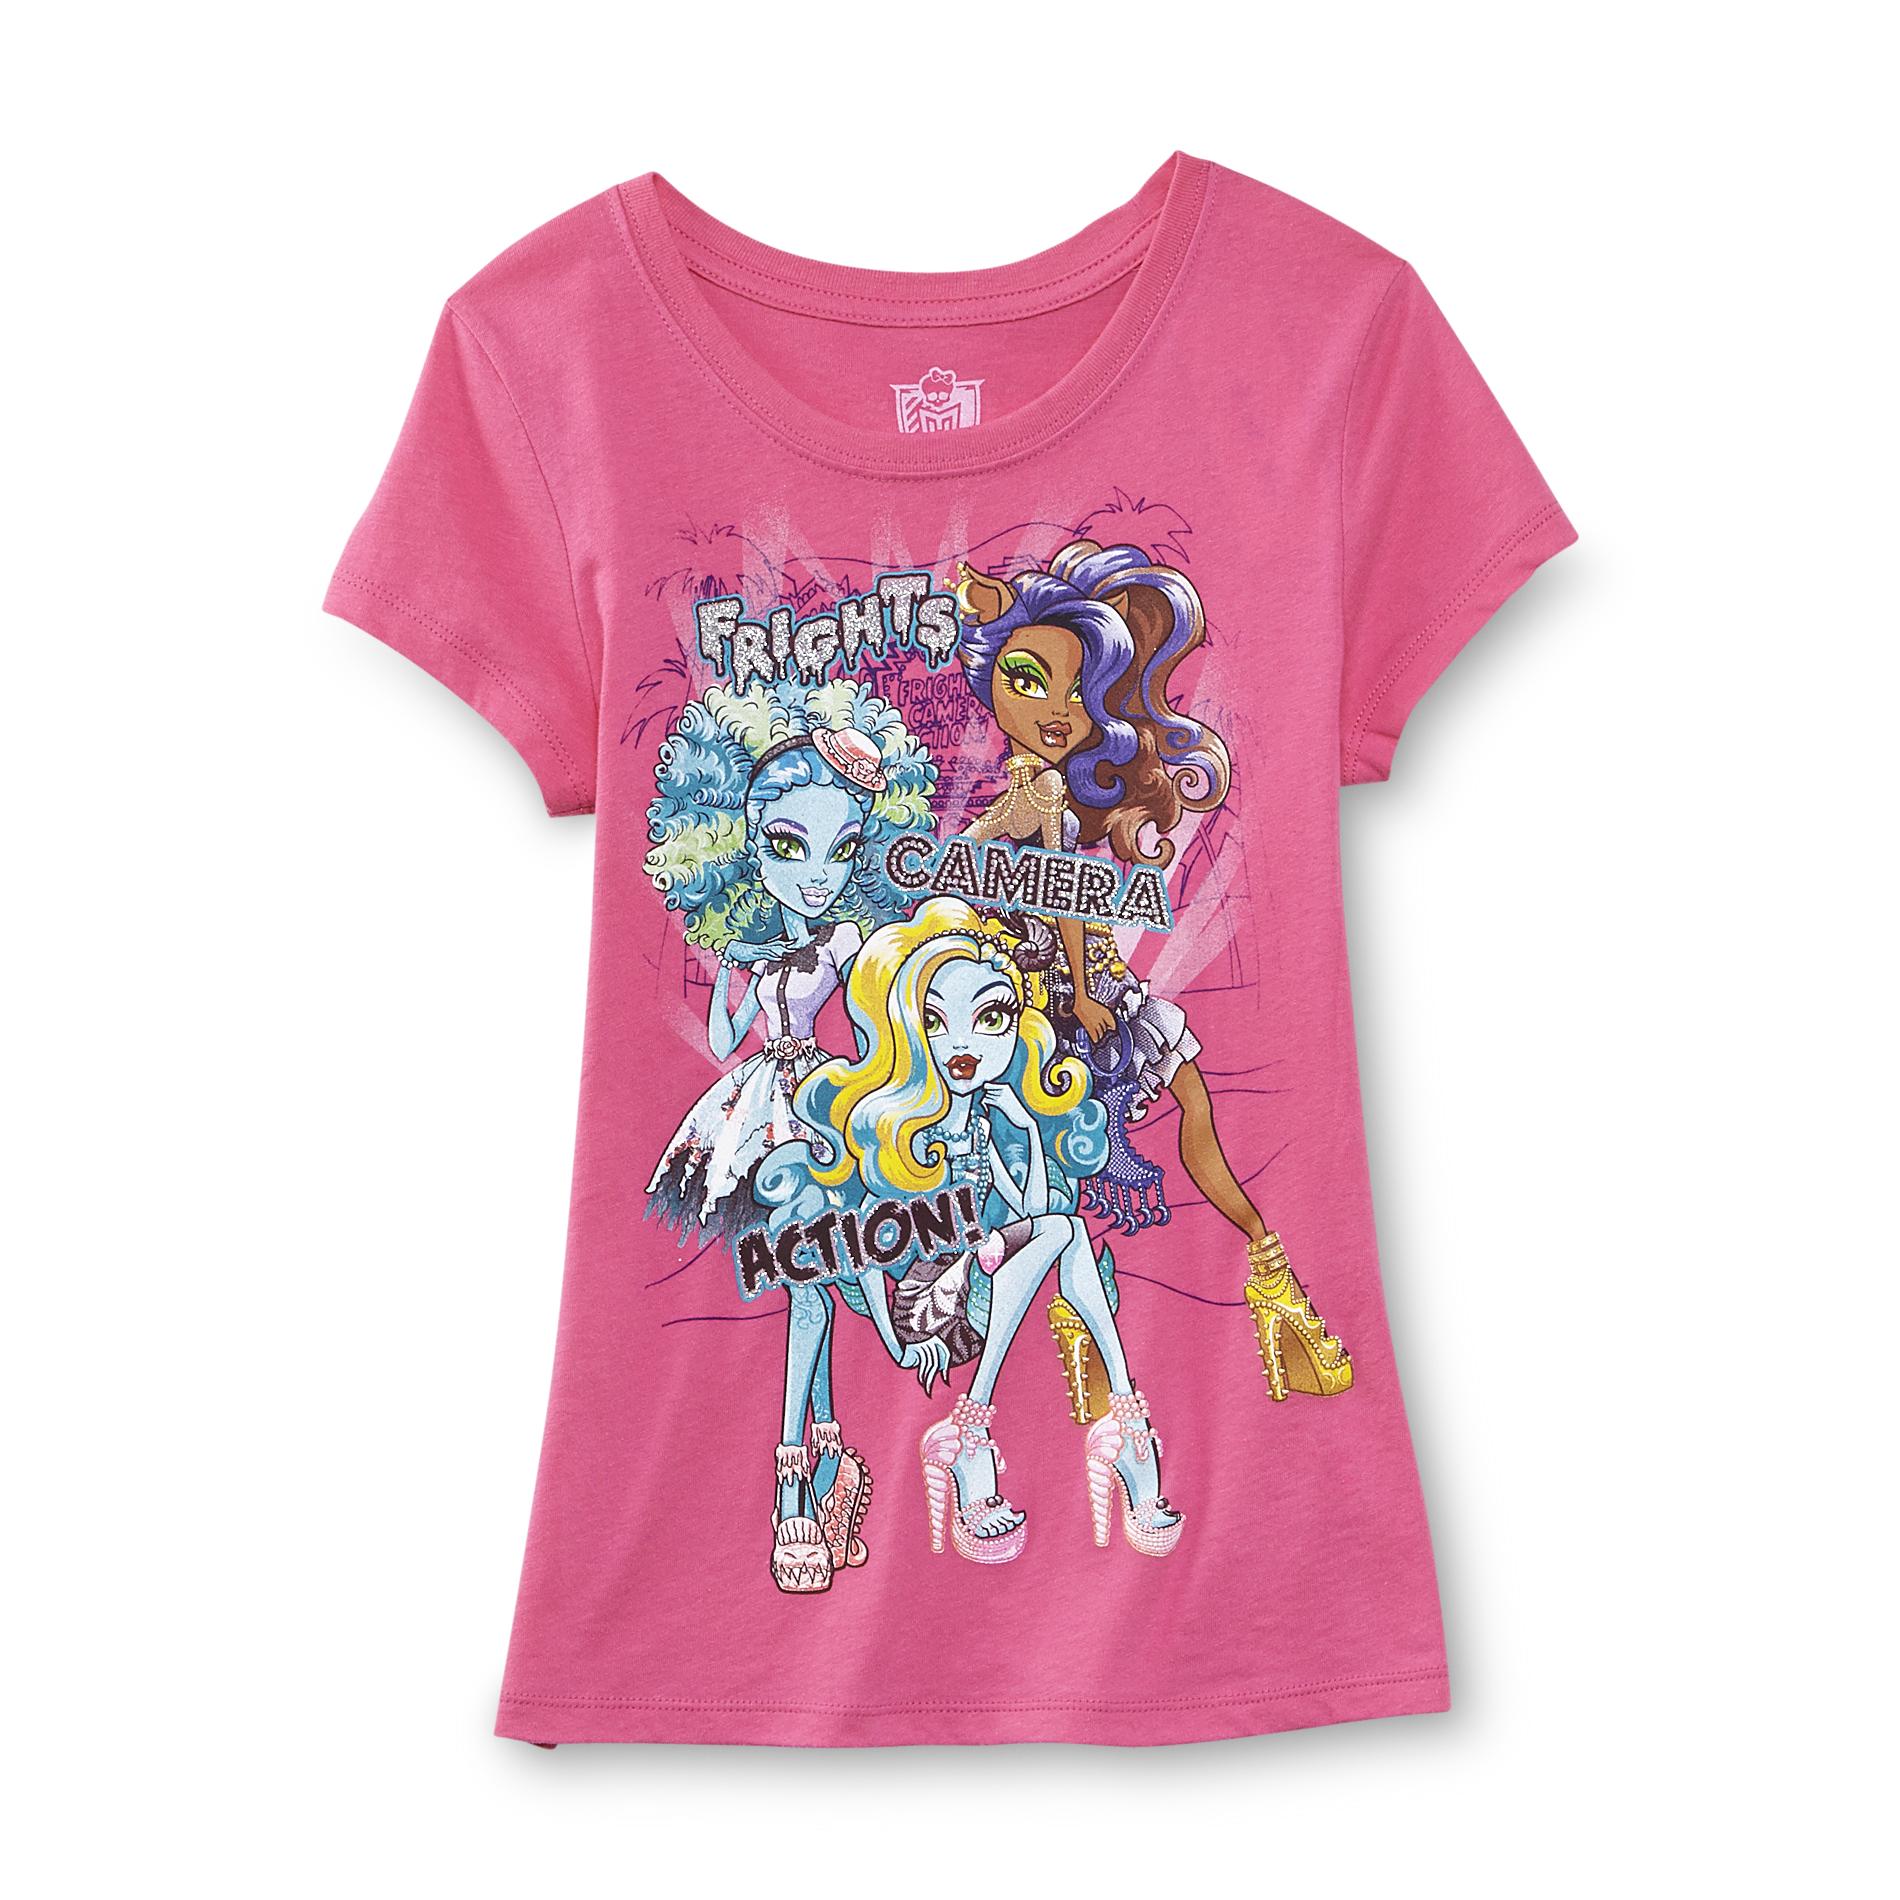 Monster High Girl's Graphic T-Shirt - Frights, Camera